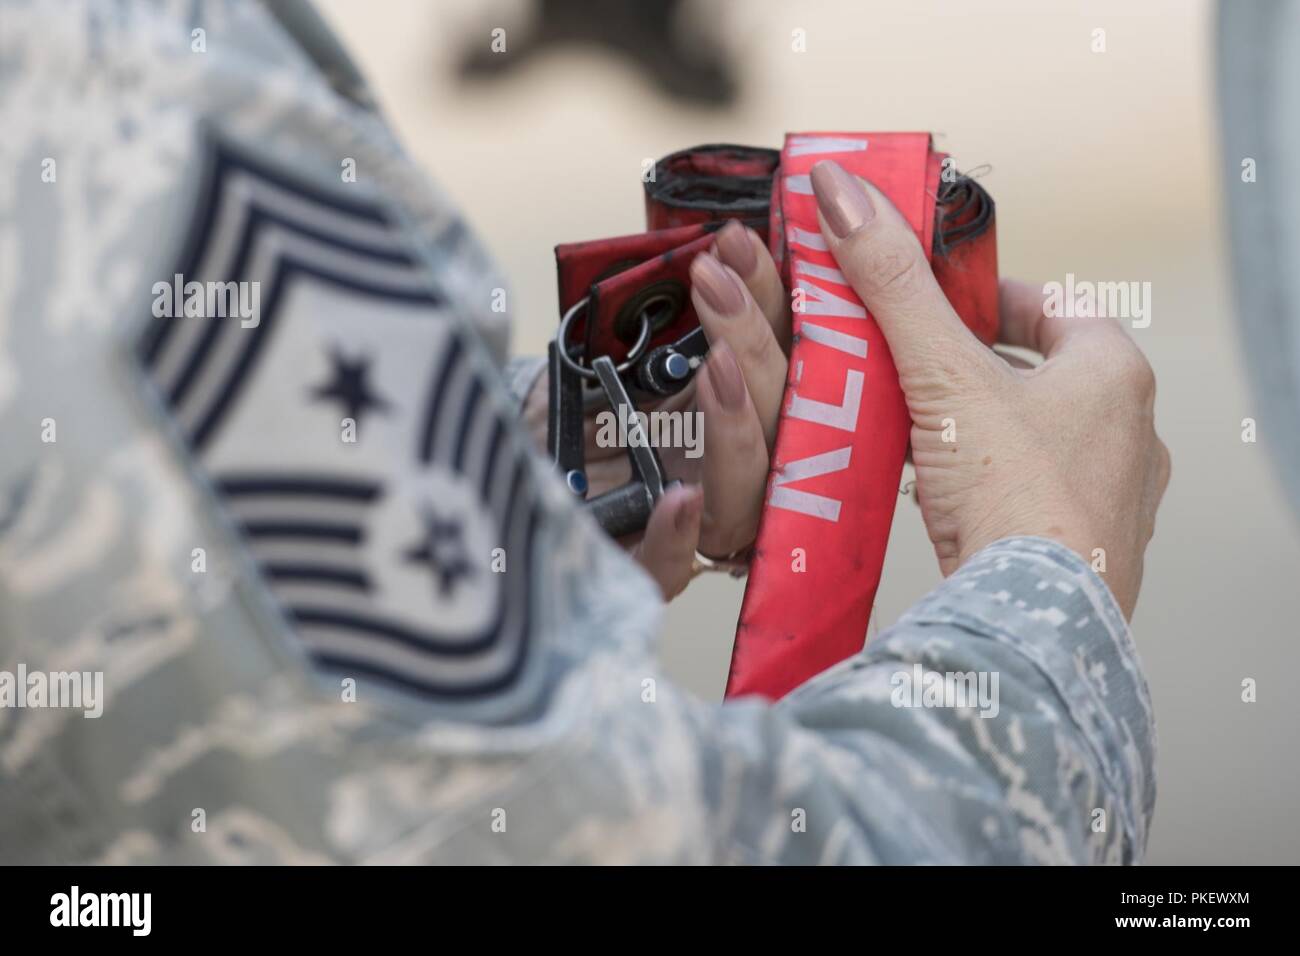 Chief Master Sgt. Tammy S. Ladley, 124th Fighter Wing command chief, wraps “remove before flight” ribbons in Boise, Idaho, Aug. 2, 2018.  As part of her retirement, Ladley assisted with the launch of an A-10 Thunderbolt II assigned to the 124th FW. Stock Photo